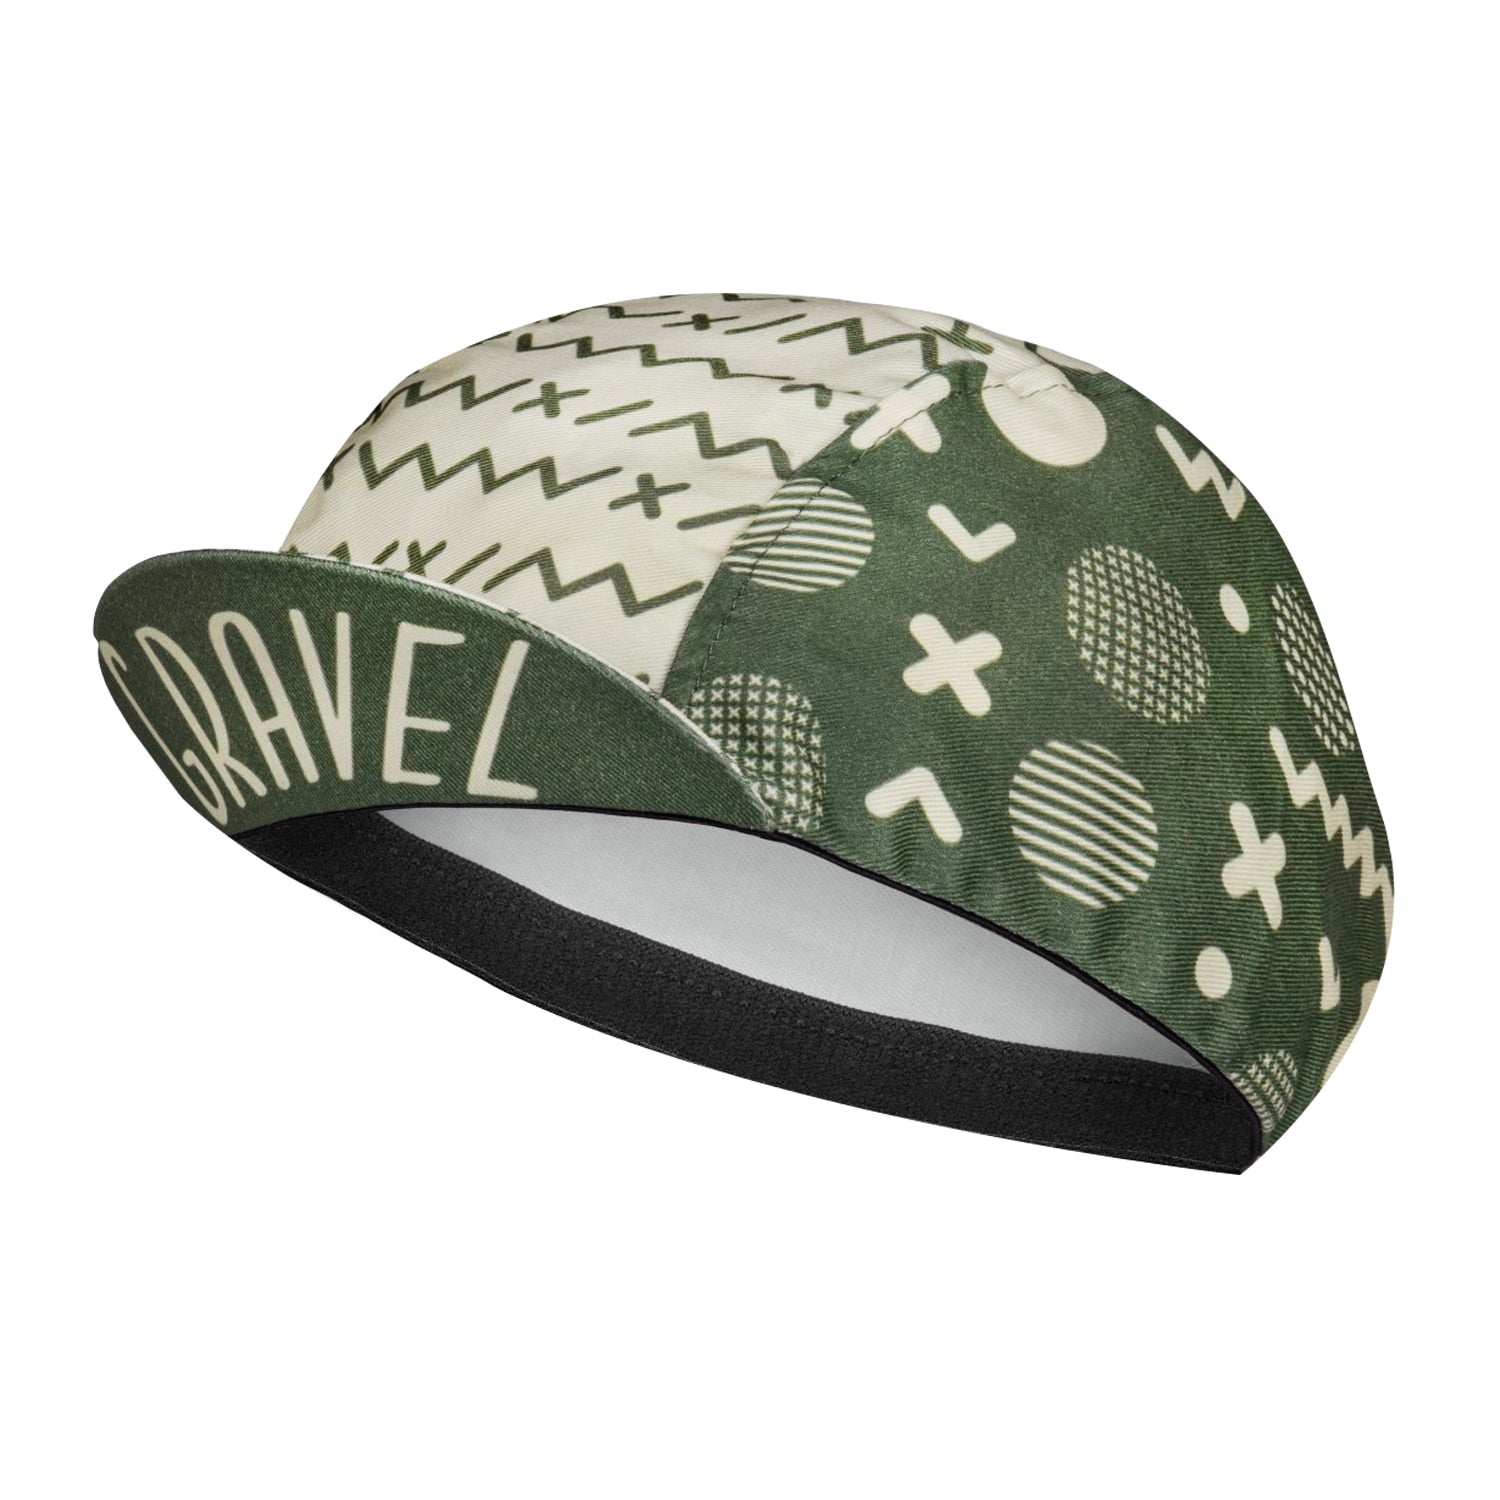 Beer Coffee Ice Cream Biscuit Cartoon Print Polyester Bicycle Cycling Caps Quick Dry Breathable Sweat Wicking Bike Hat